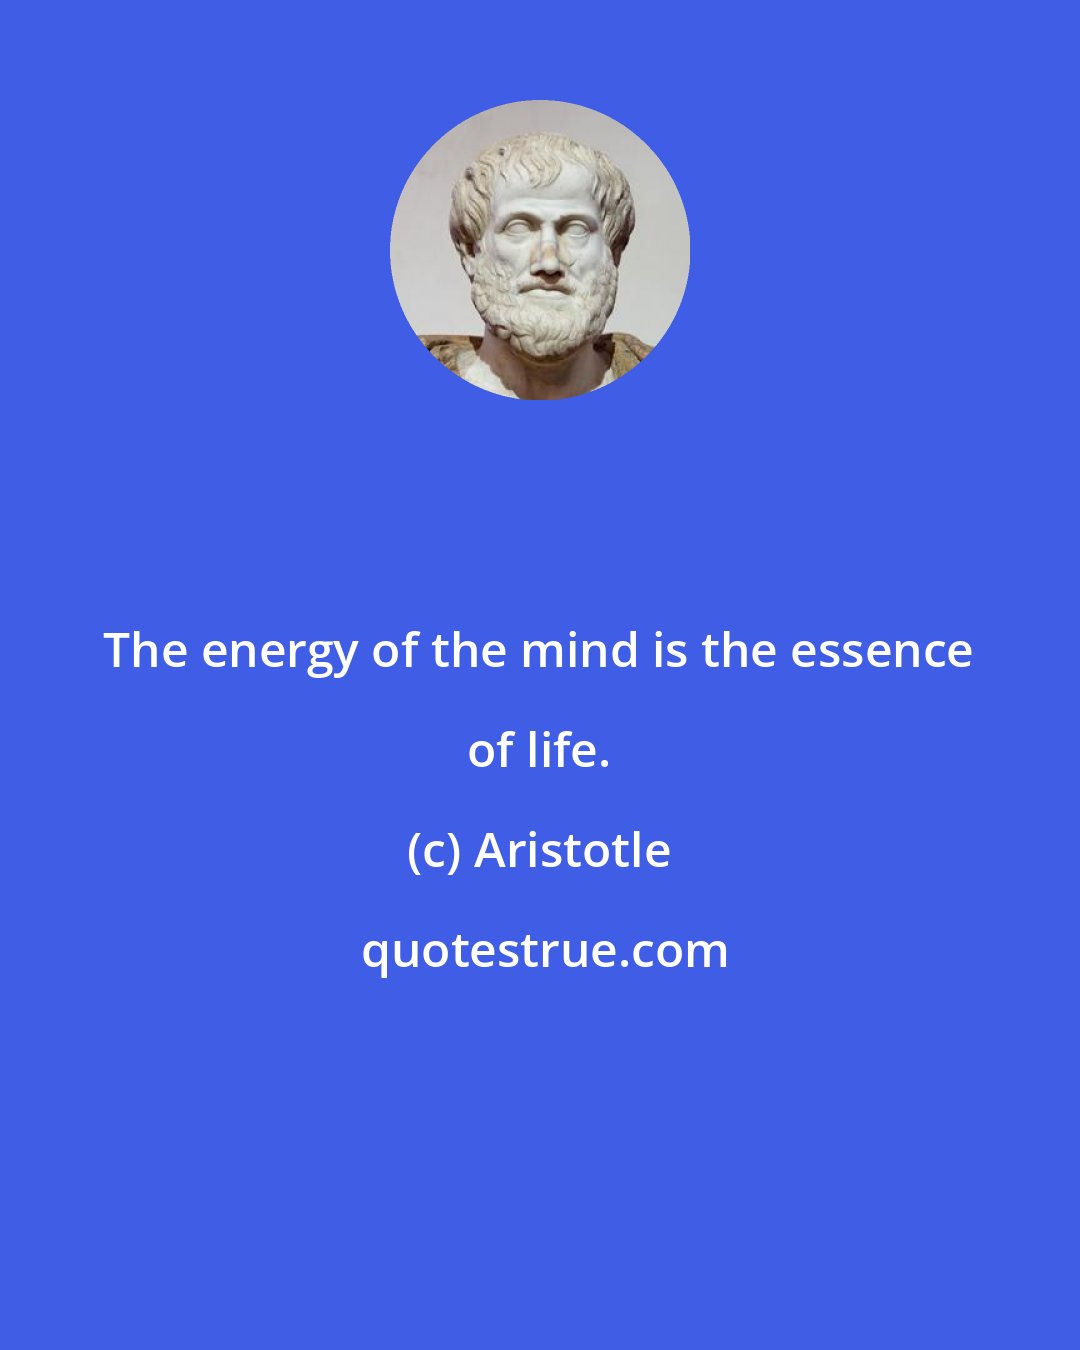 Aristotle: The energy of the mind is the essence of life.